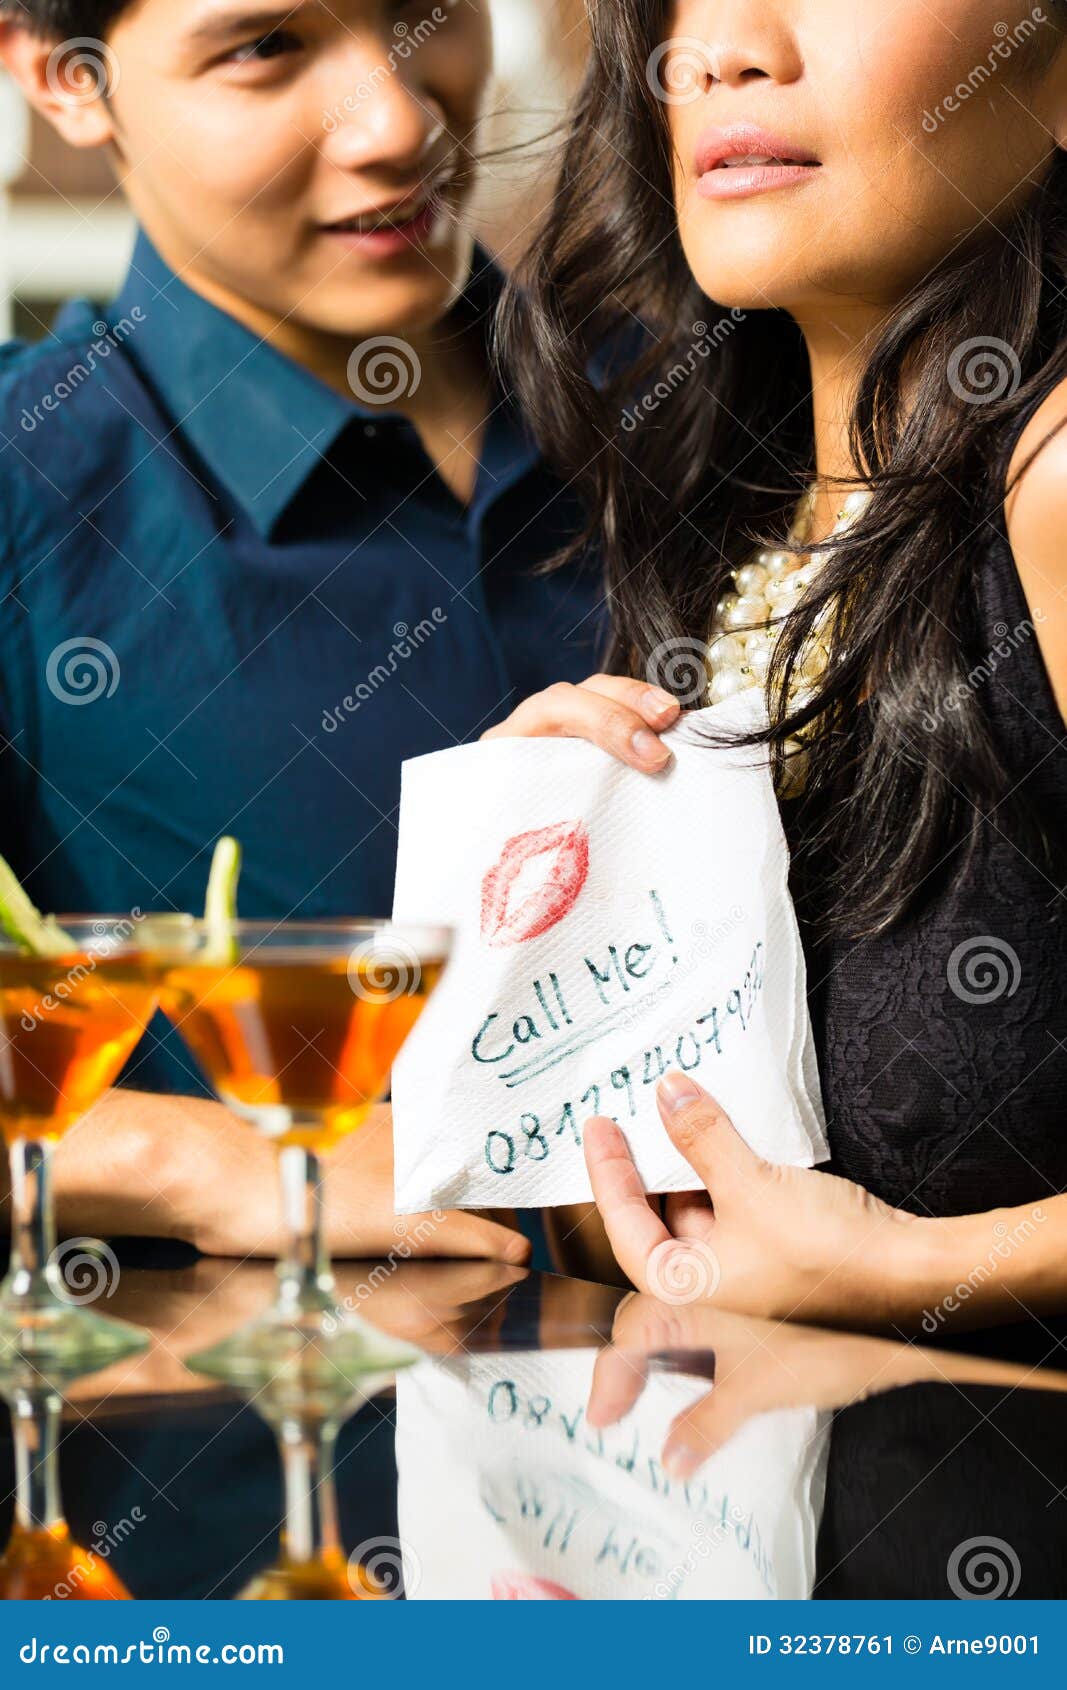 Asian Woman Seduces The Man In Restaurant Stock Image